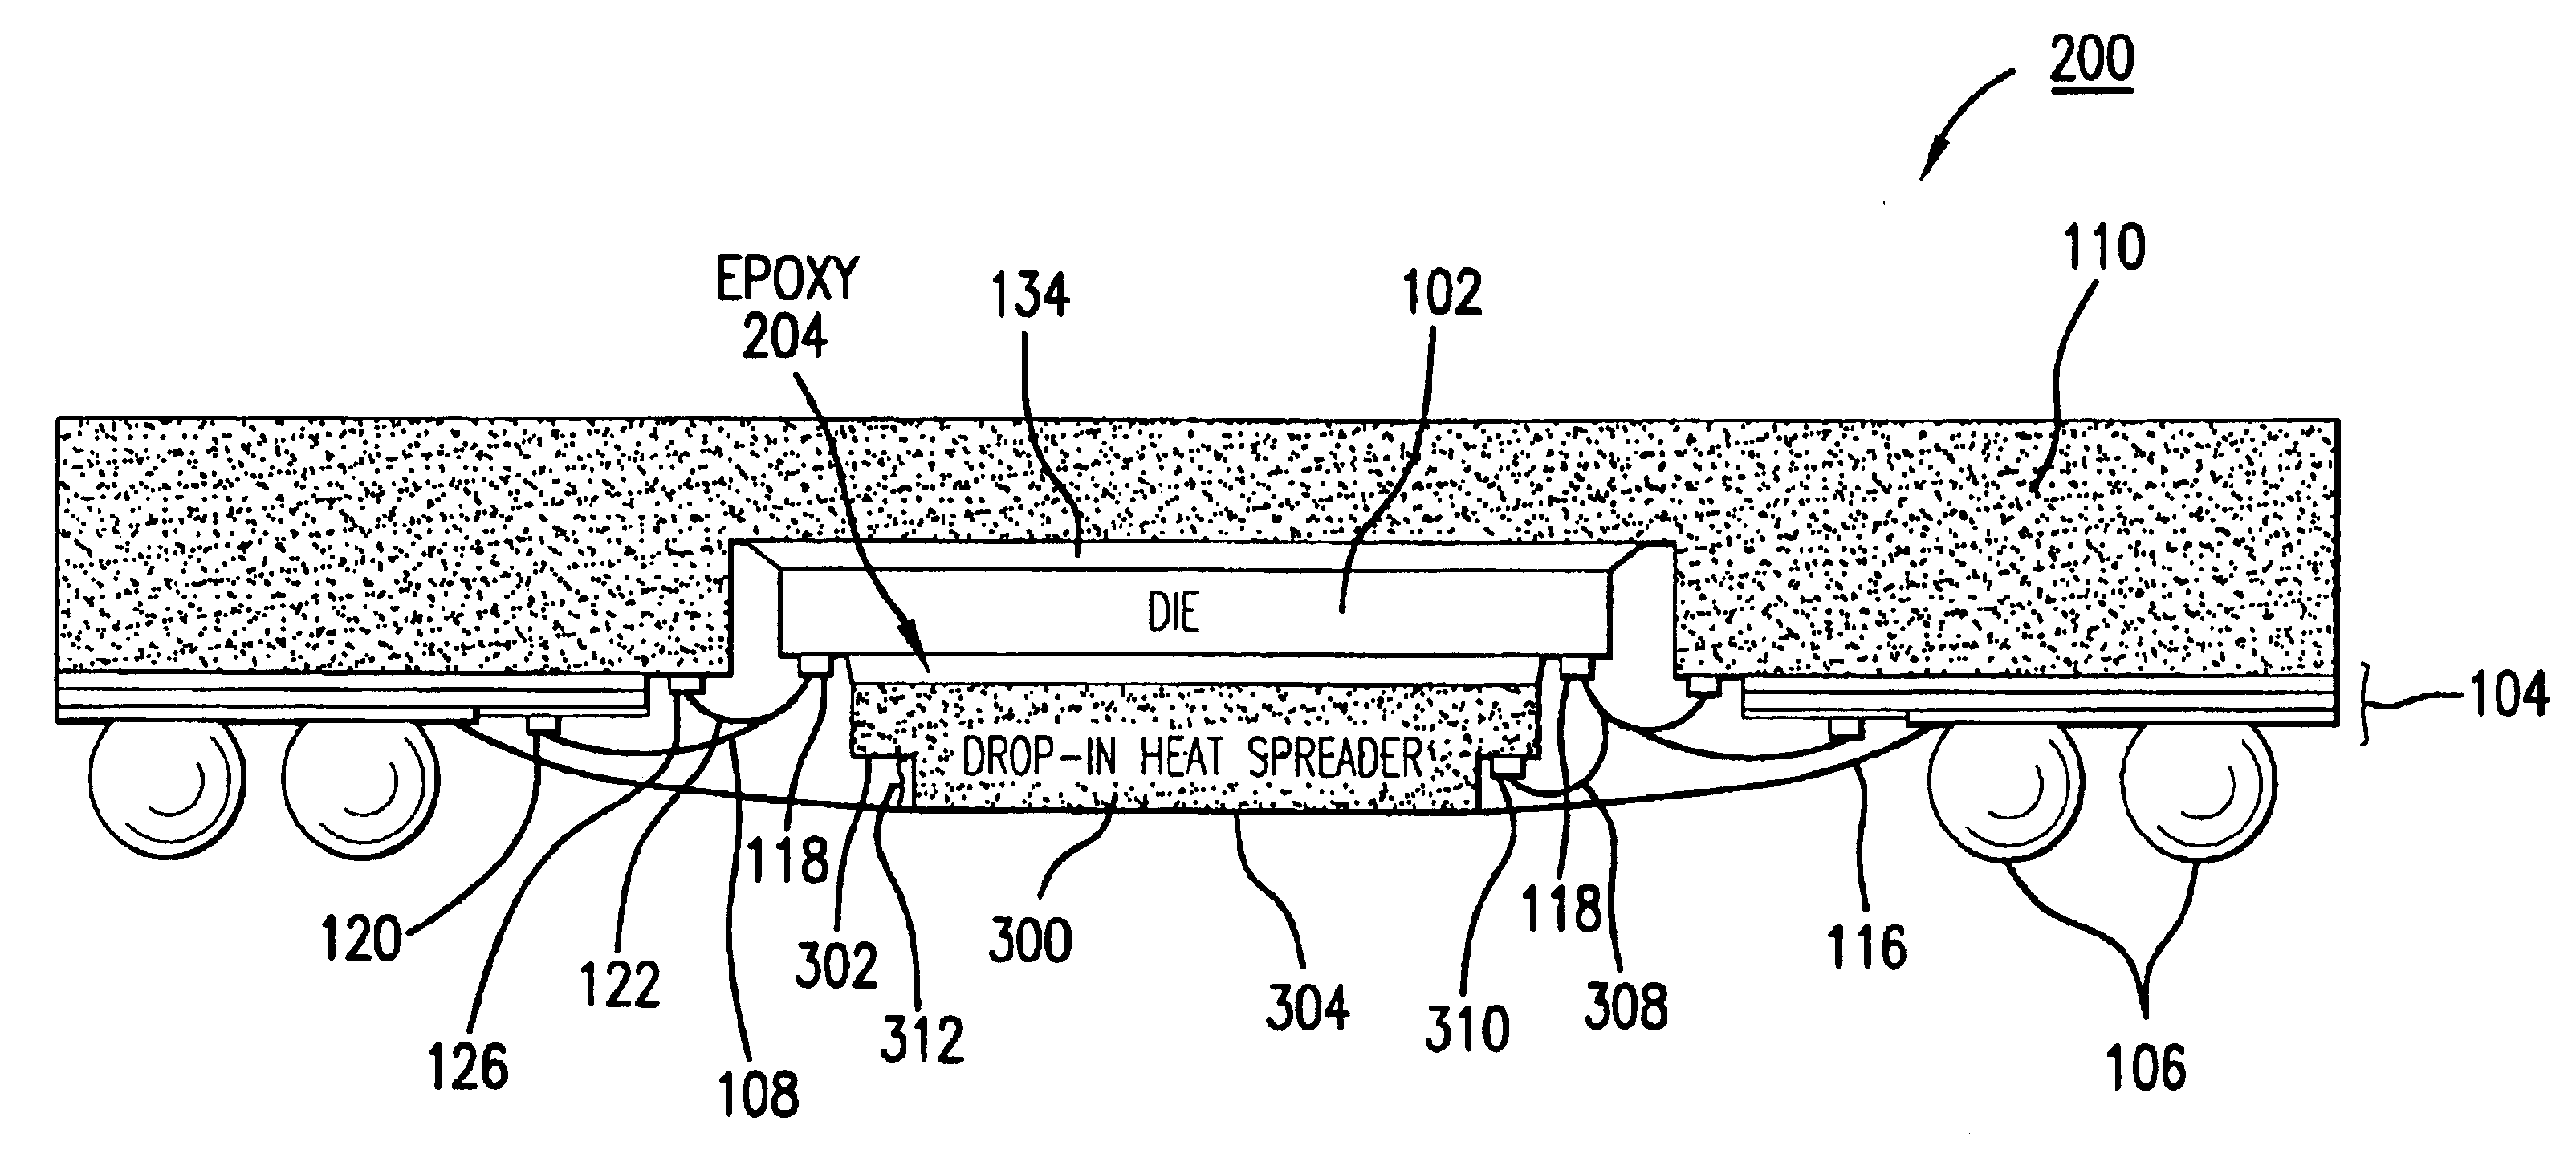 Die-down ball grid array package with die-attached heat spreader and method for making the same